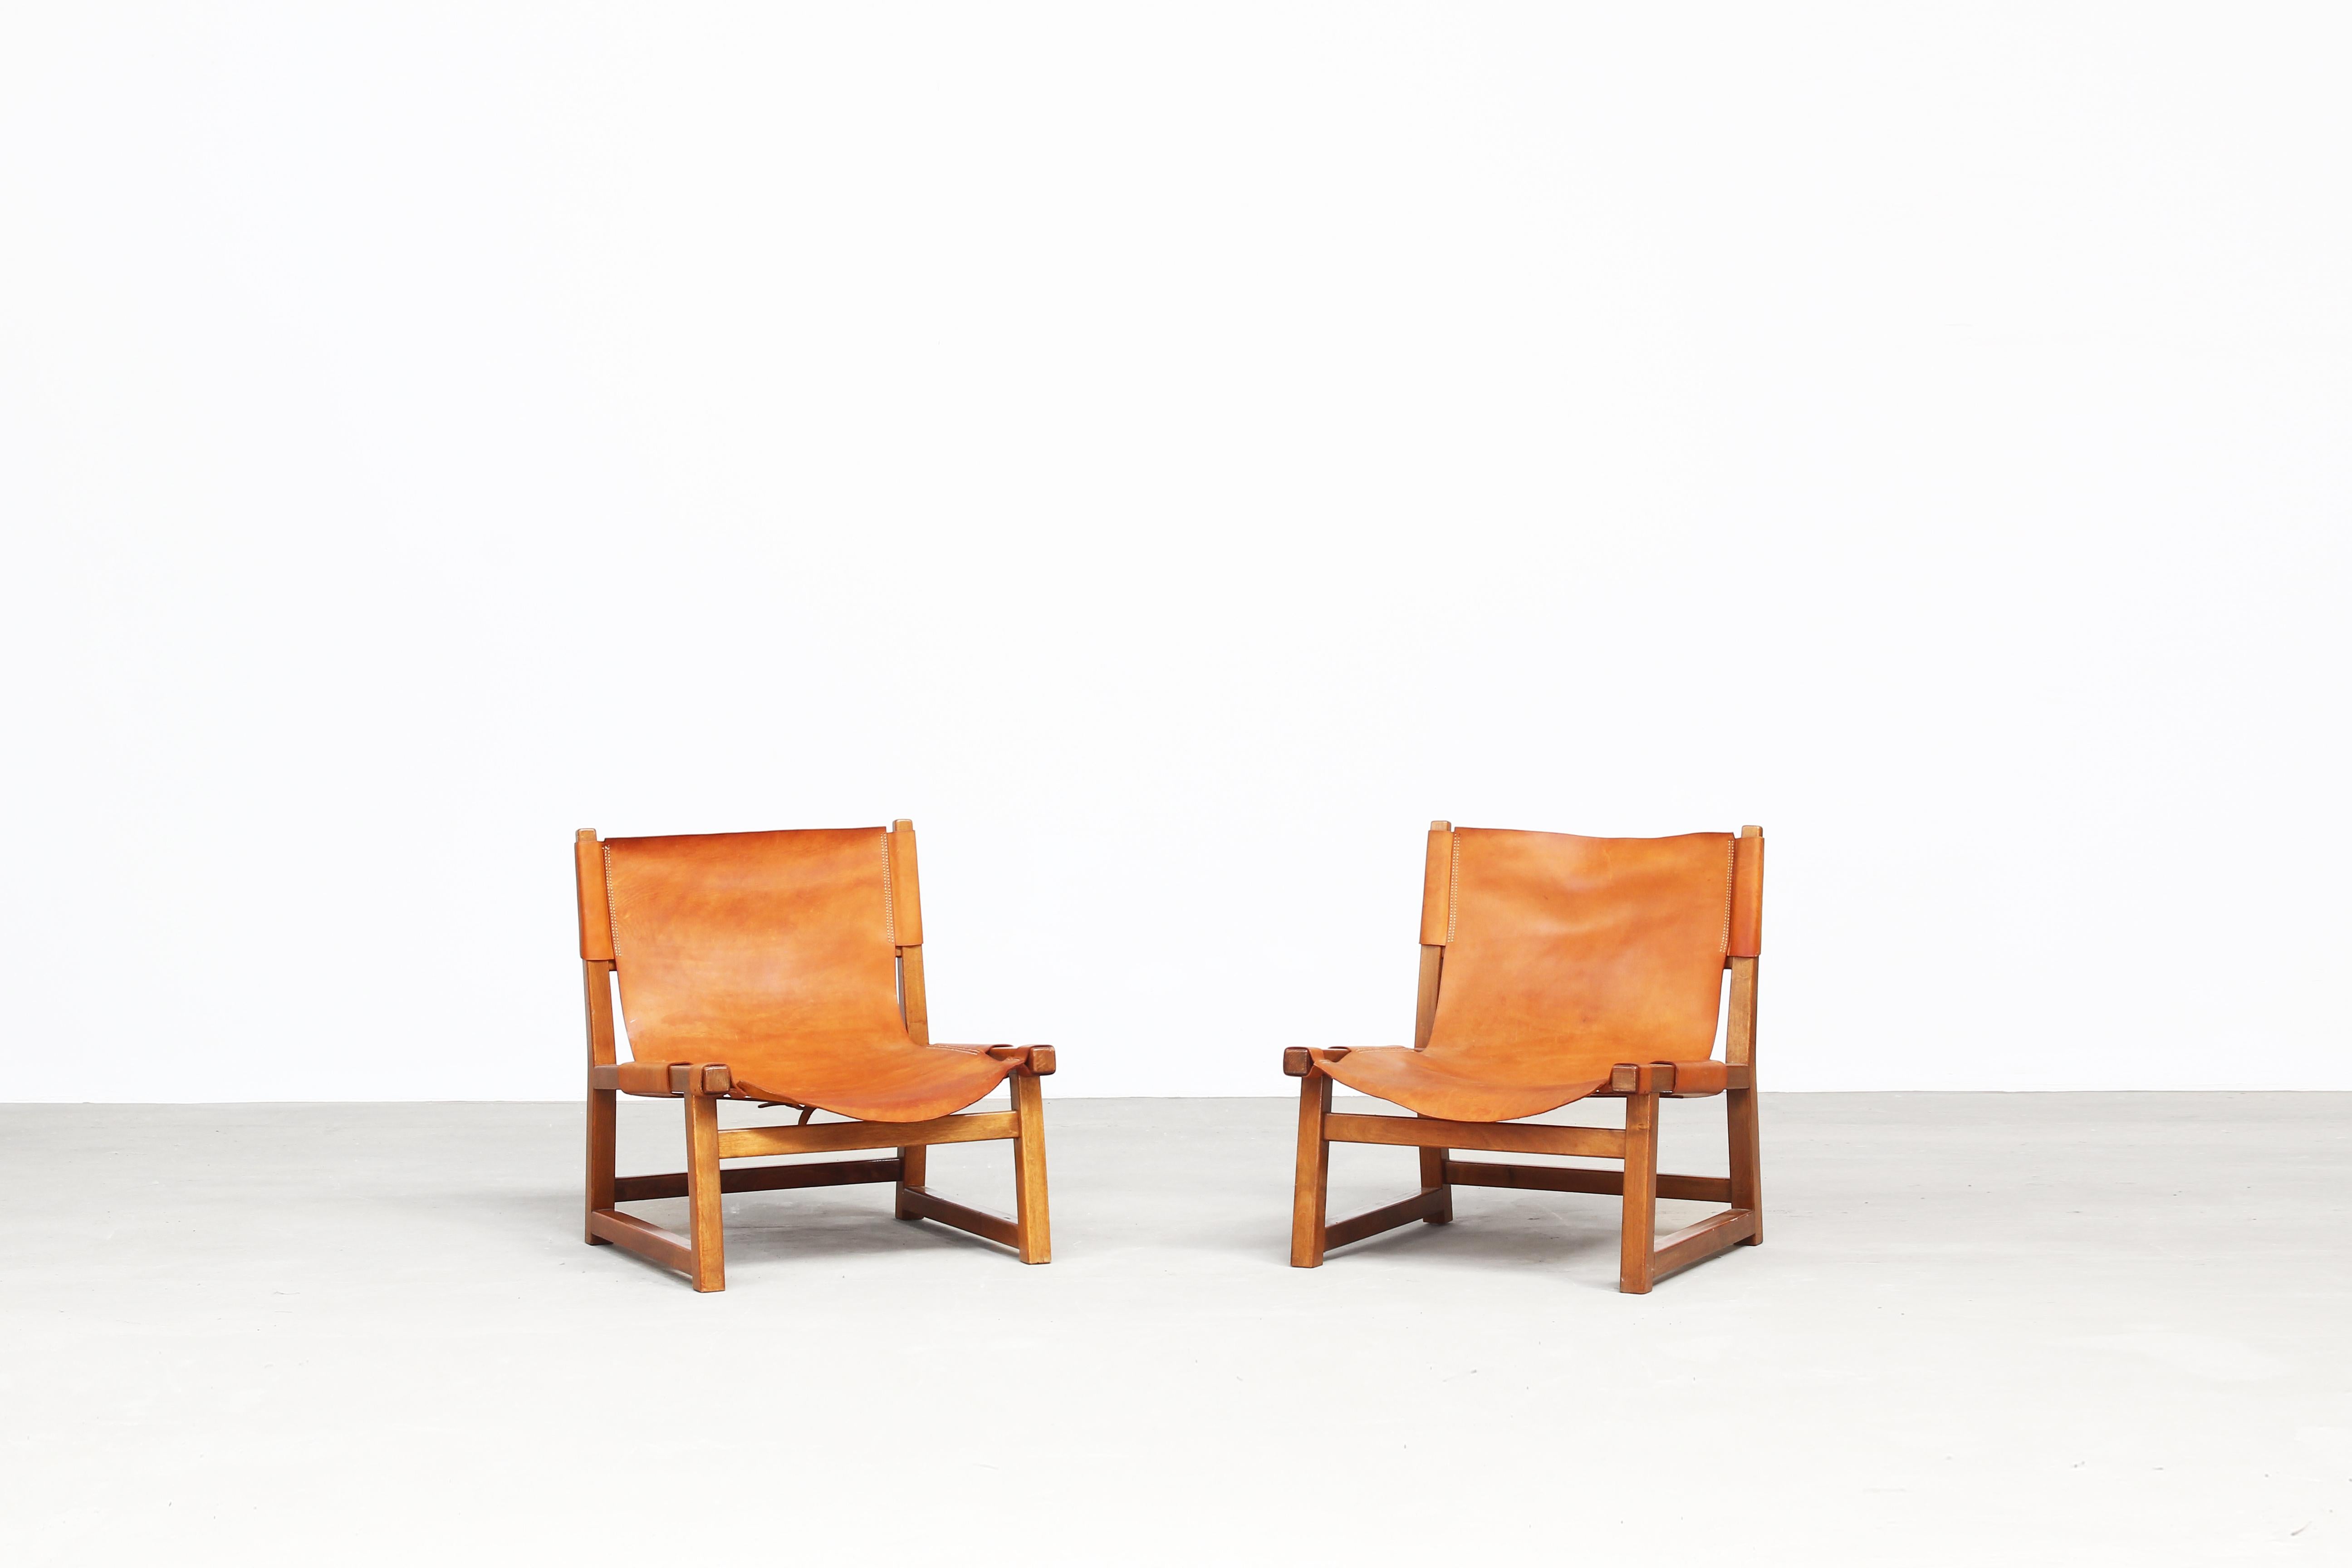 A beautiful pair of hunting chairs designed by Paco Muñoz for Darro, and well-known as 'Riaza' chair, Spain, 1960s.
Both chairs come in a great patinated leather and a wooden walnut frame, ready for usage.